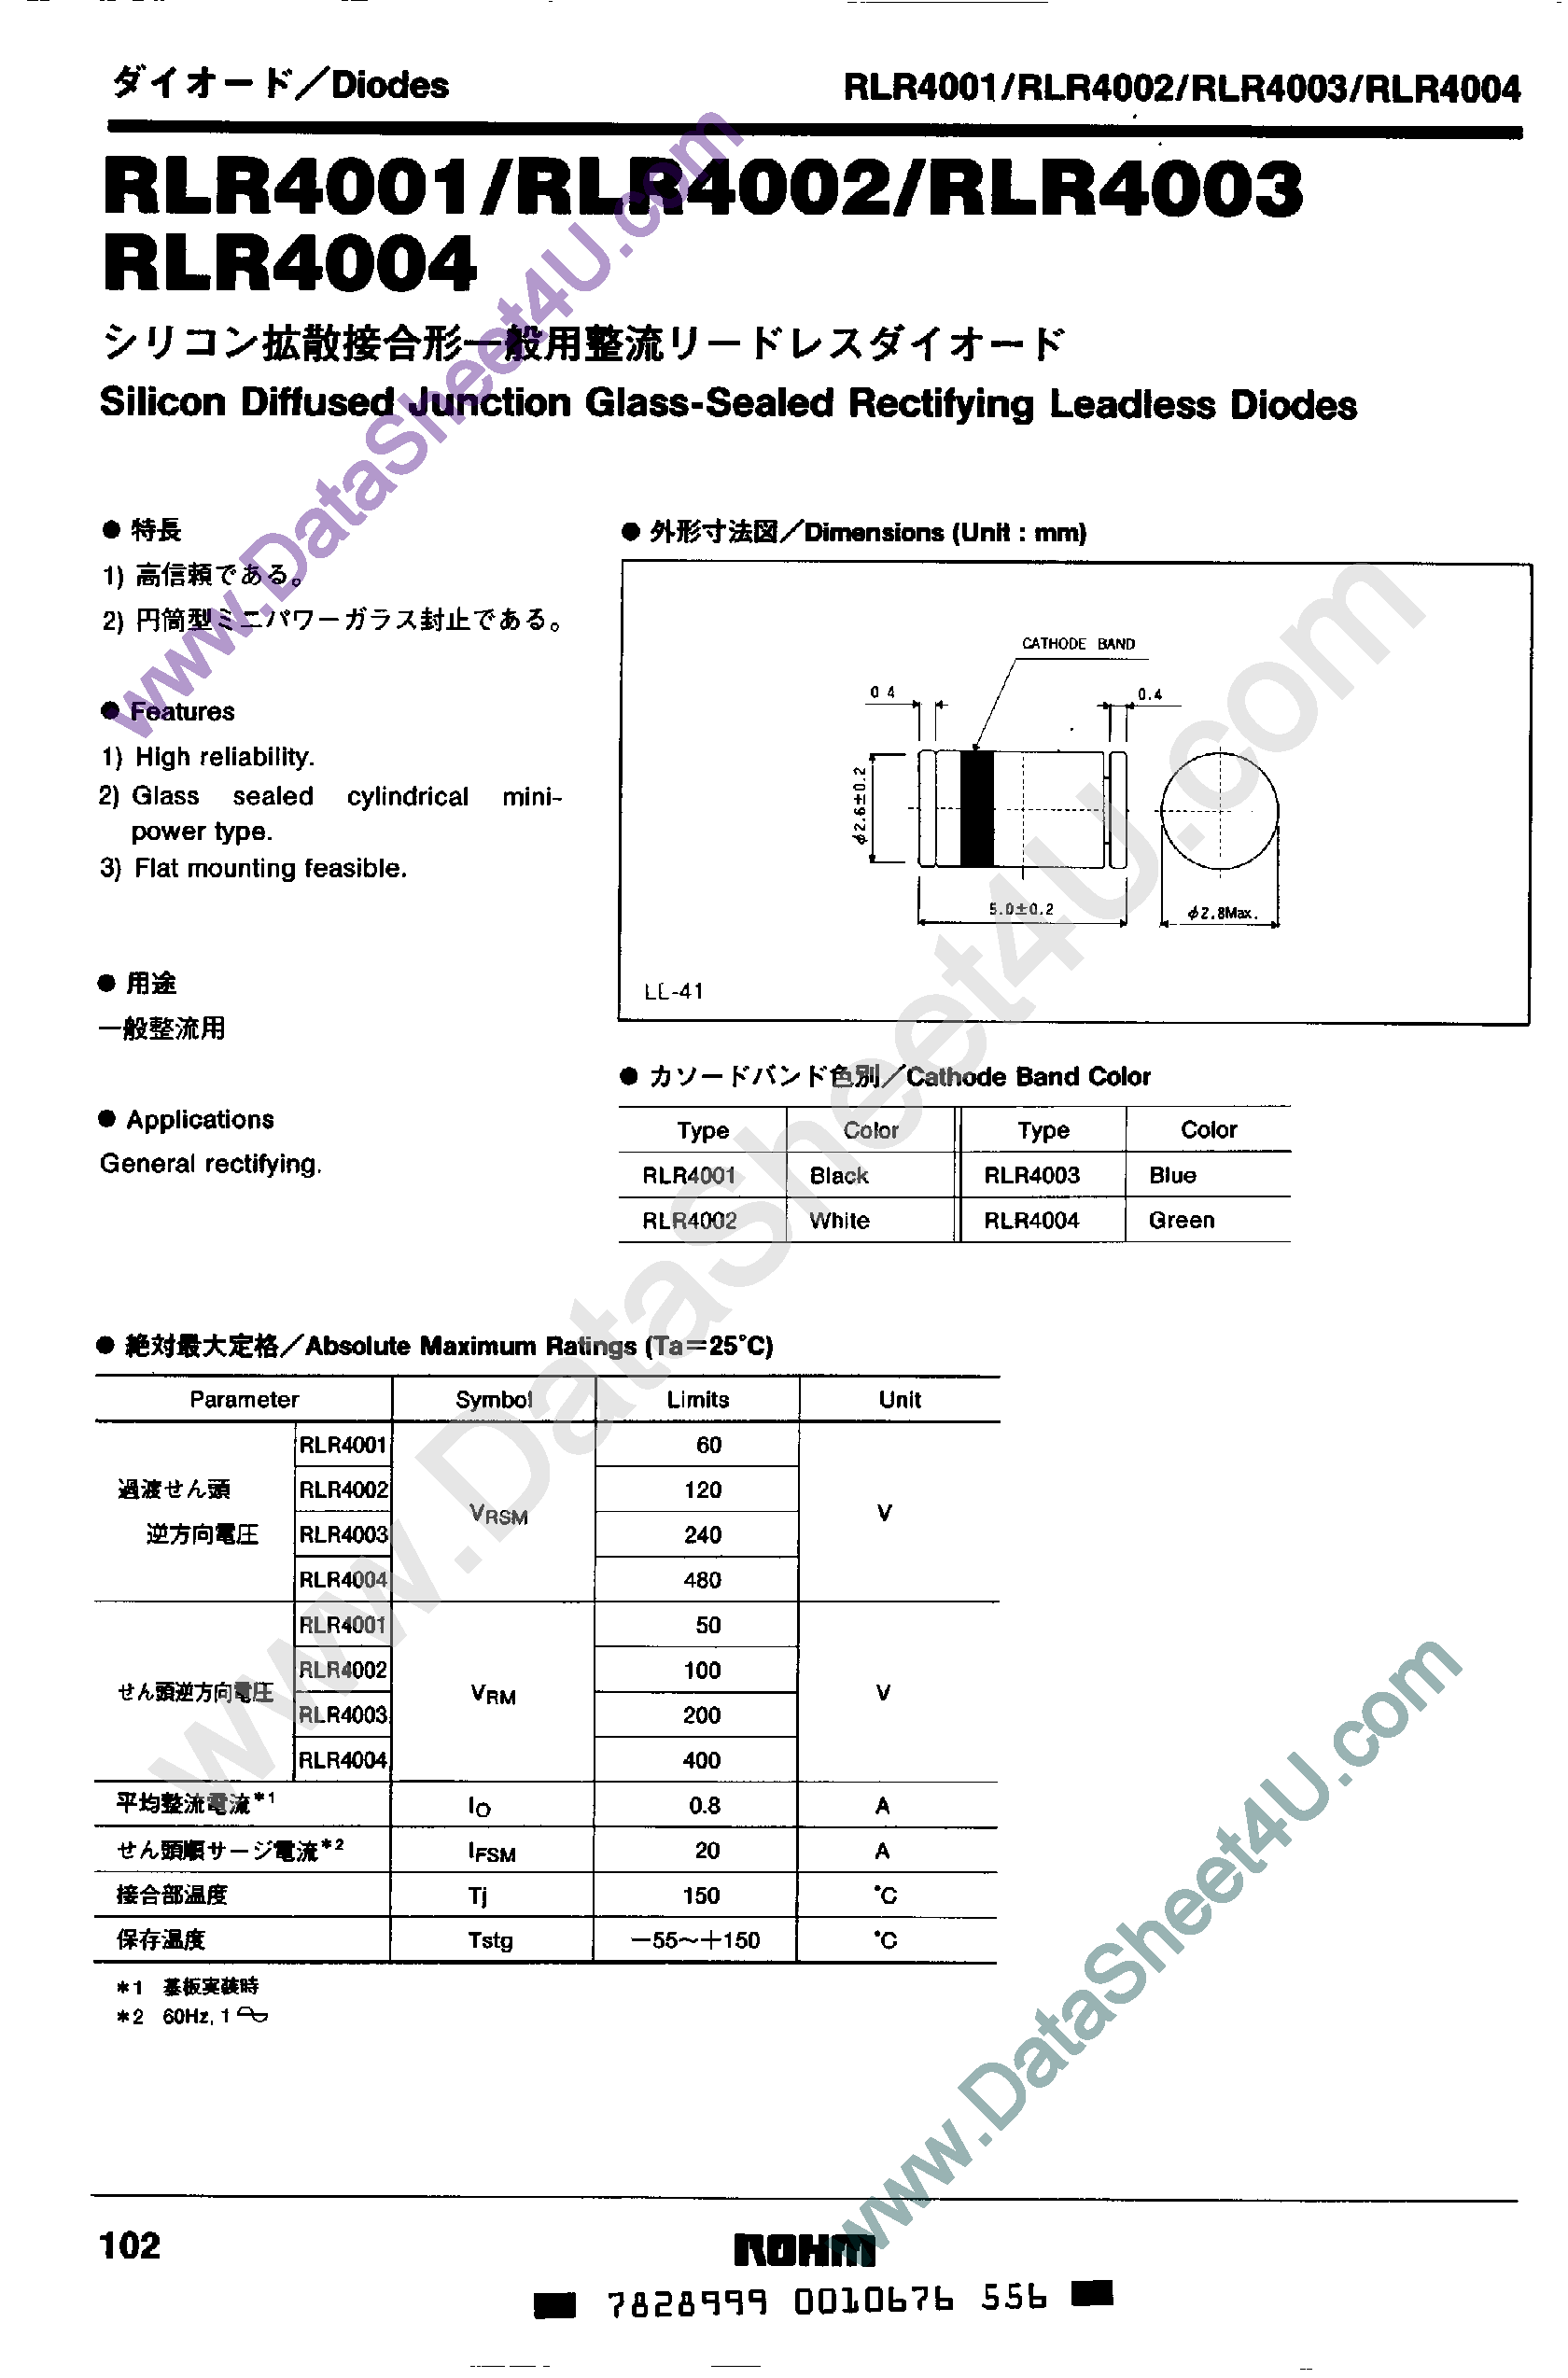 Datasheet RLR4001 - (RLR4001 - RLR4004) Silicon Diffused Hunction Glass-Sealed Rectifying Leading Diodes page 1